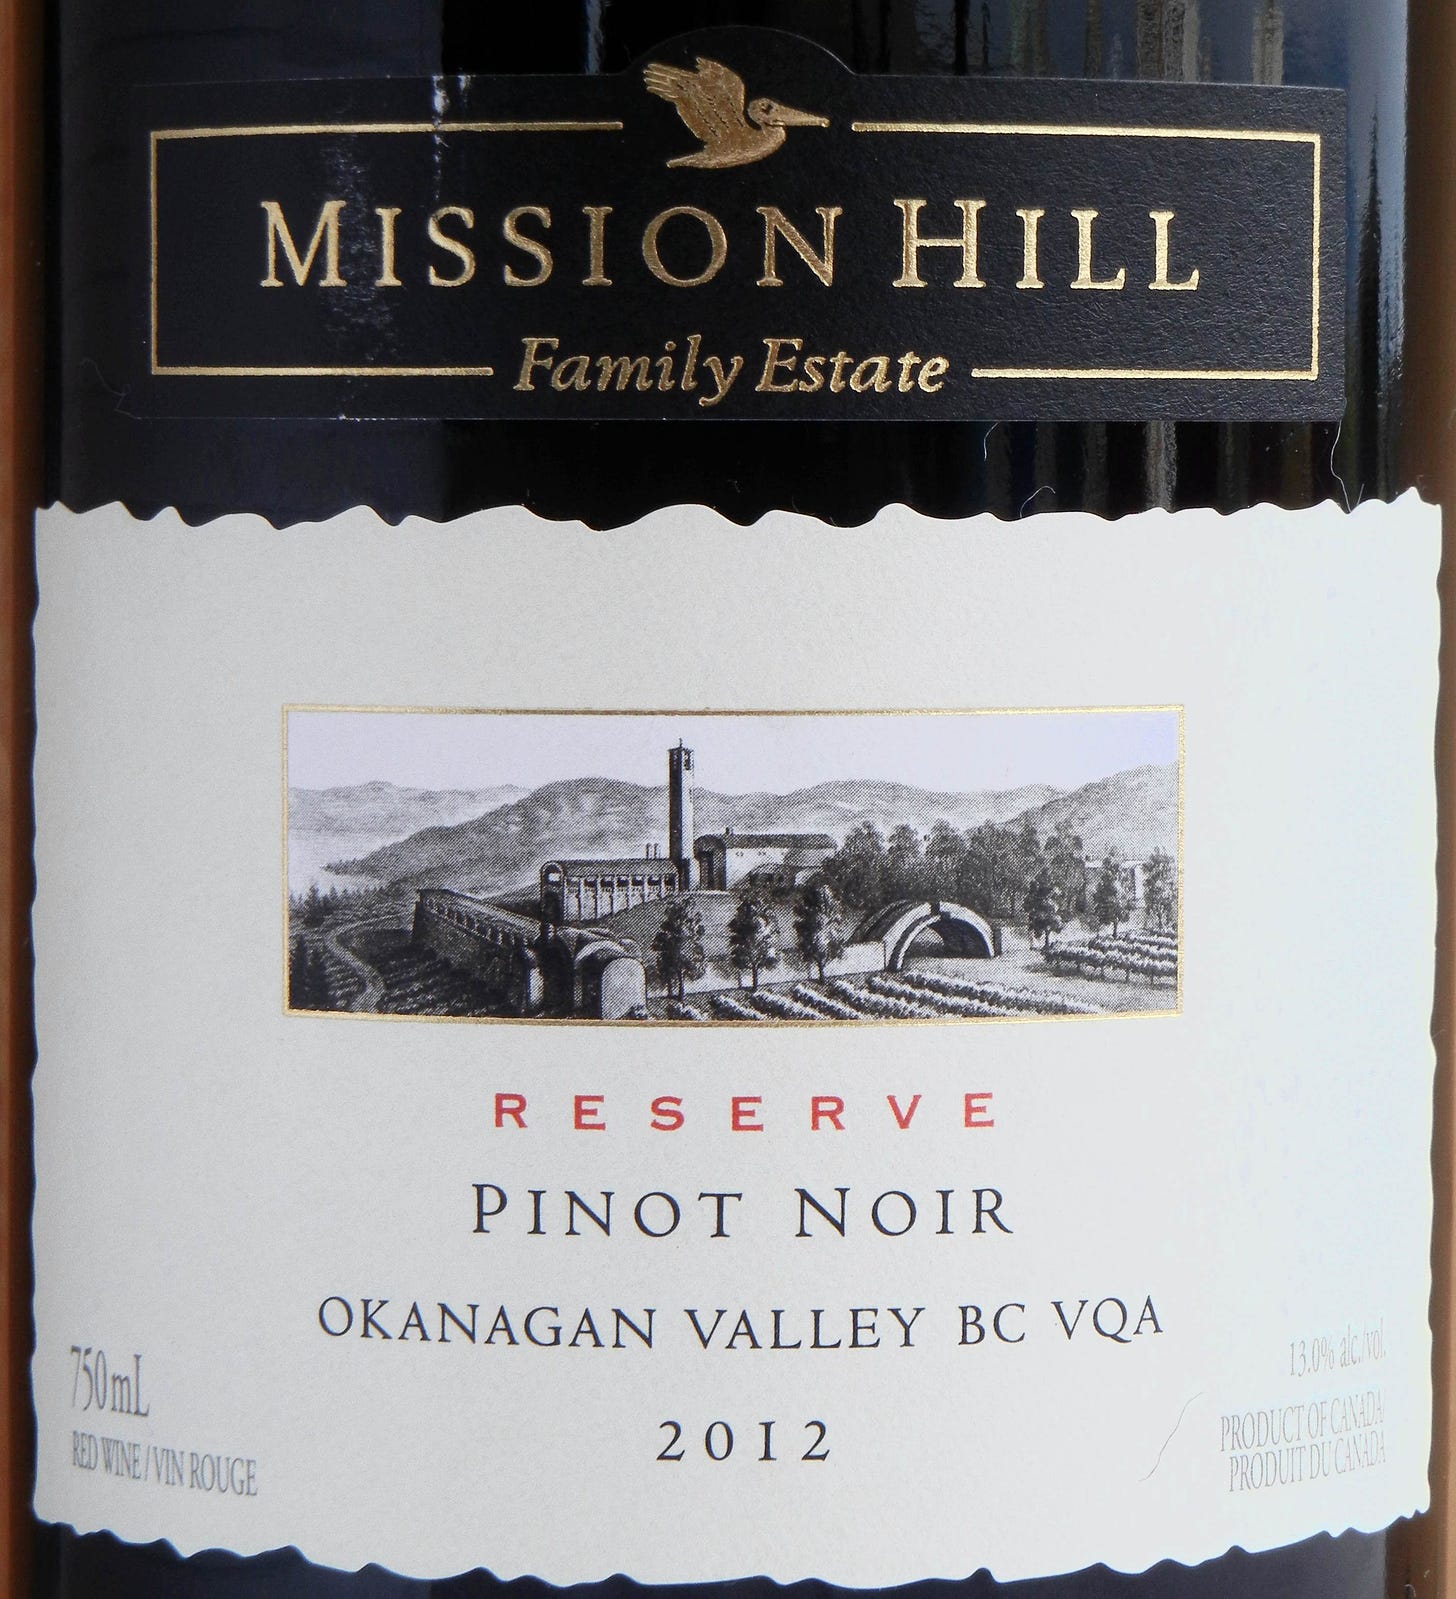 Mission Hill Reserve Pinot Noir 2012 Label - BC Pinot Noir Tasting Review 19 